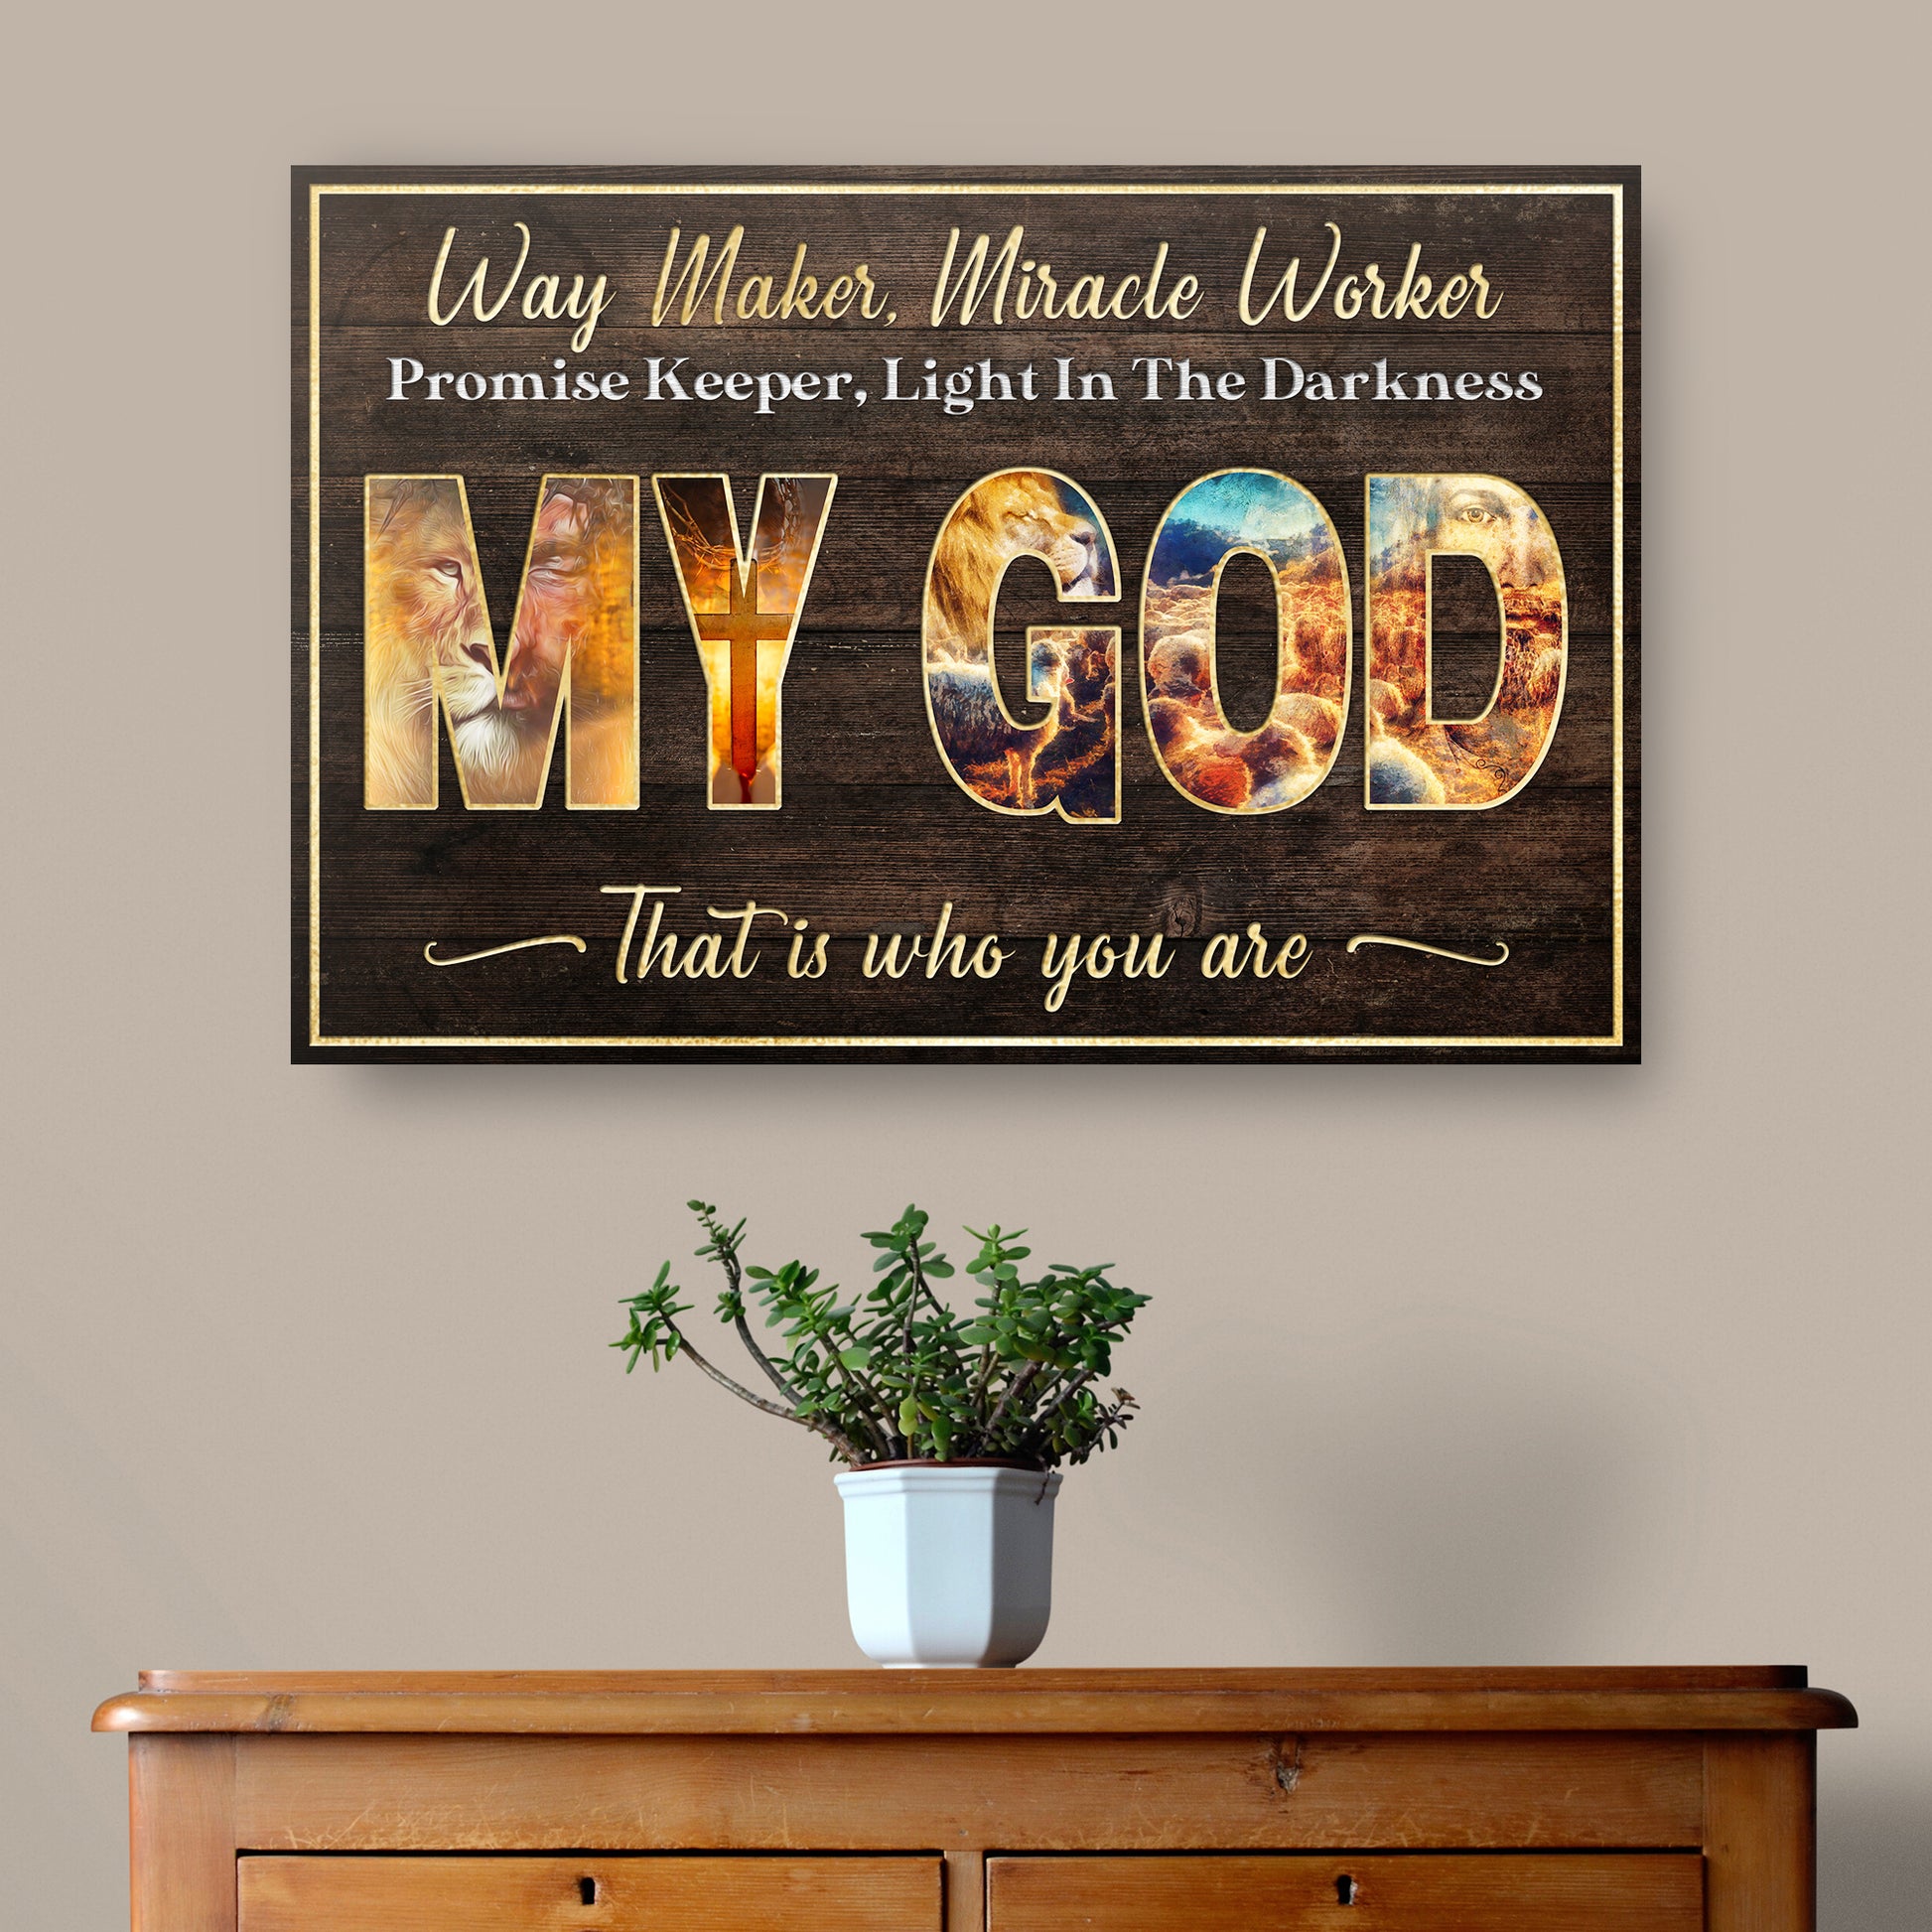 My God Way Maker Miracle Worker Sign - Image by Tailored Canvases